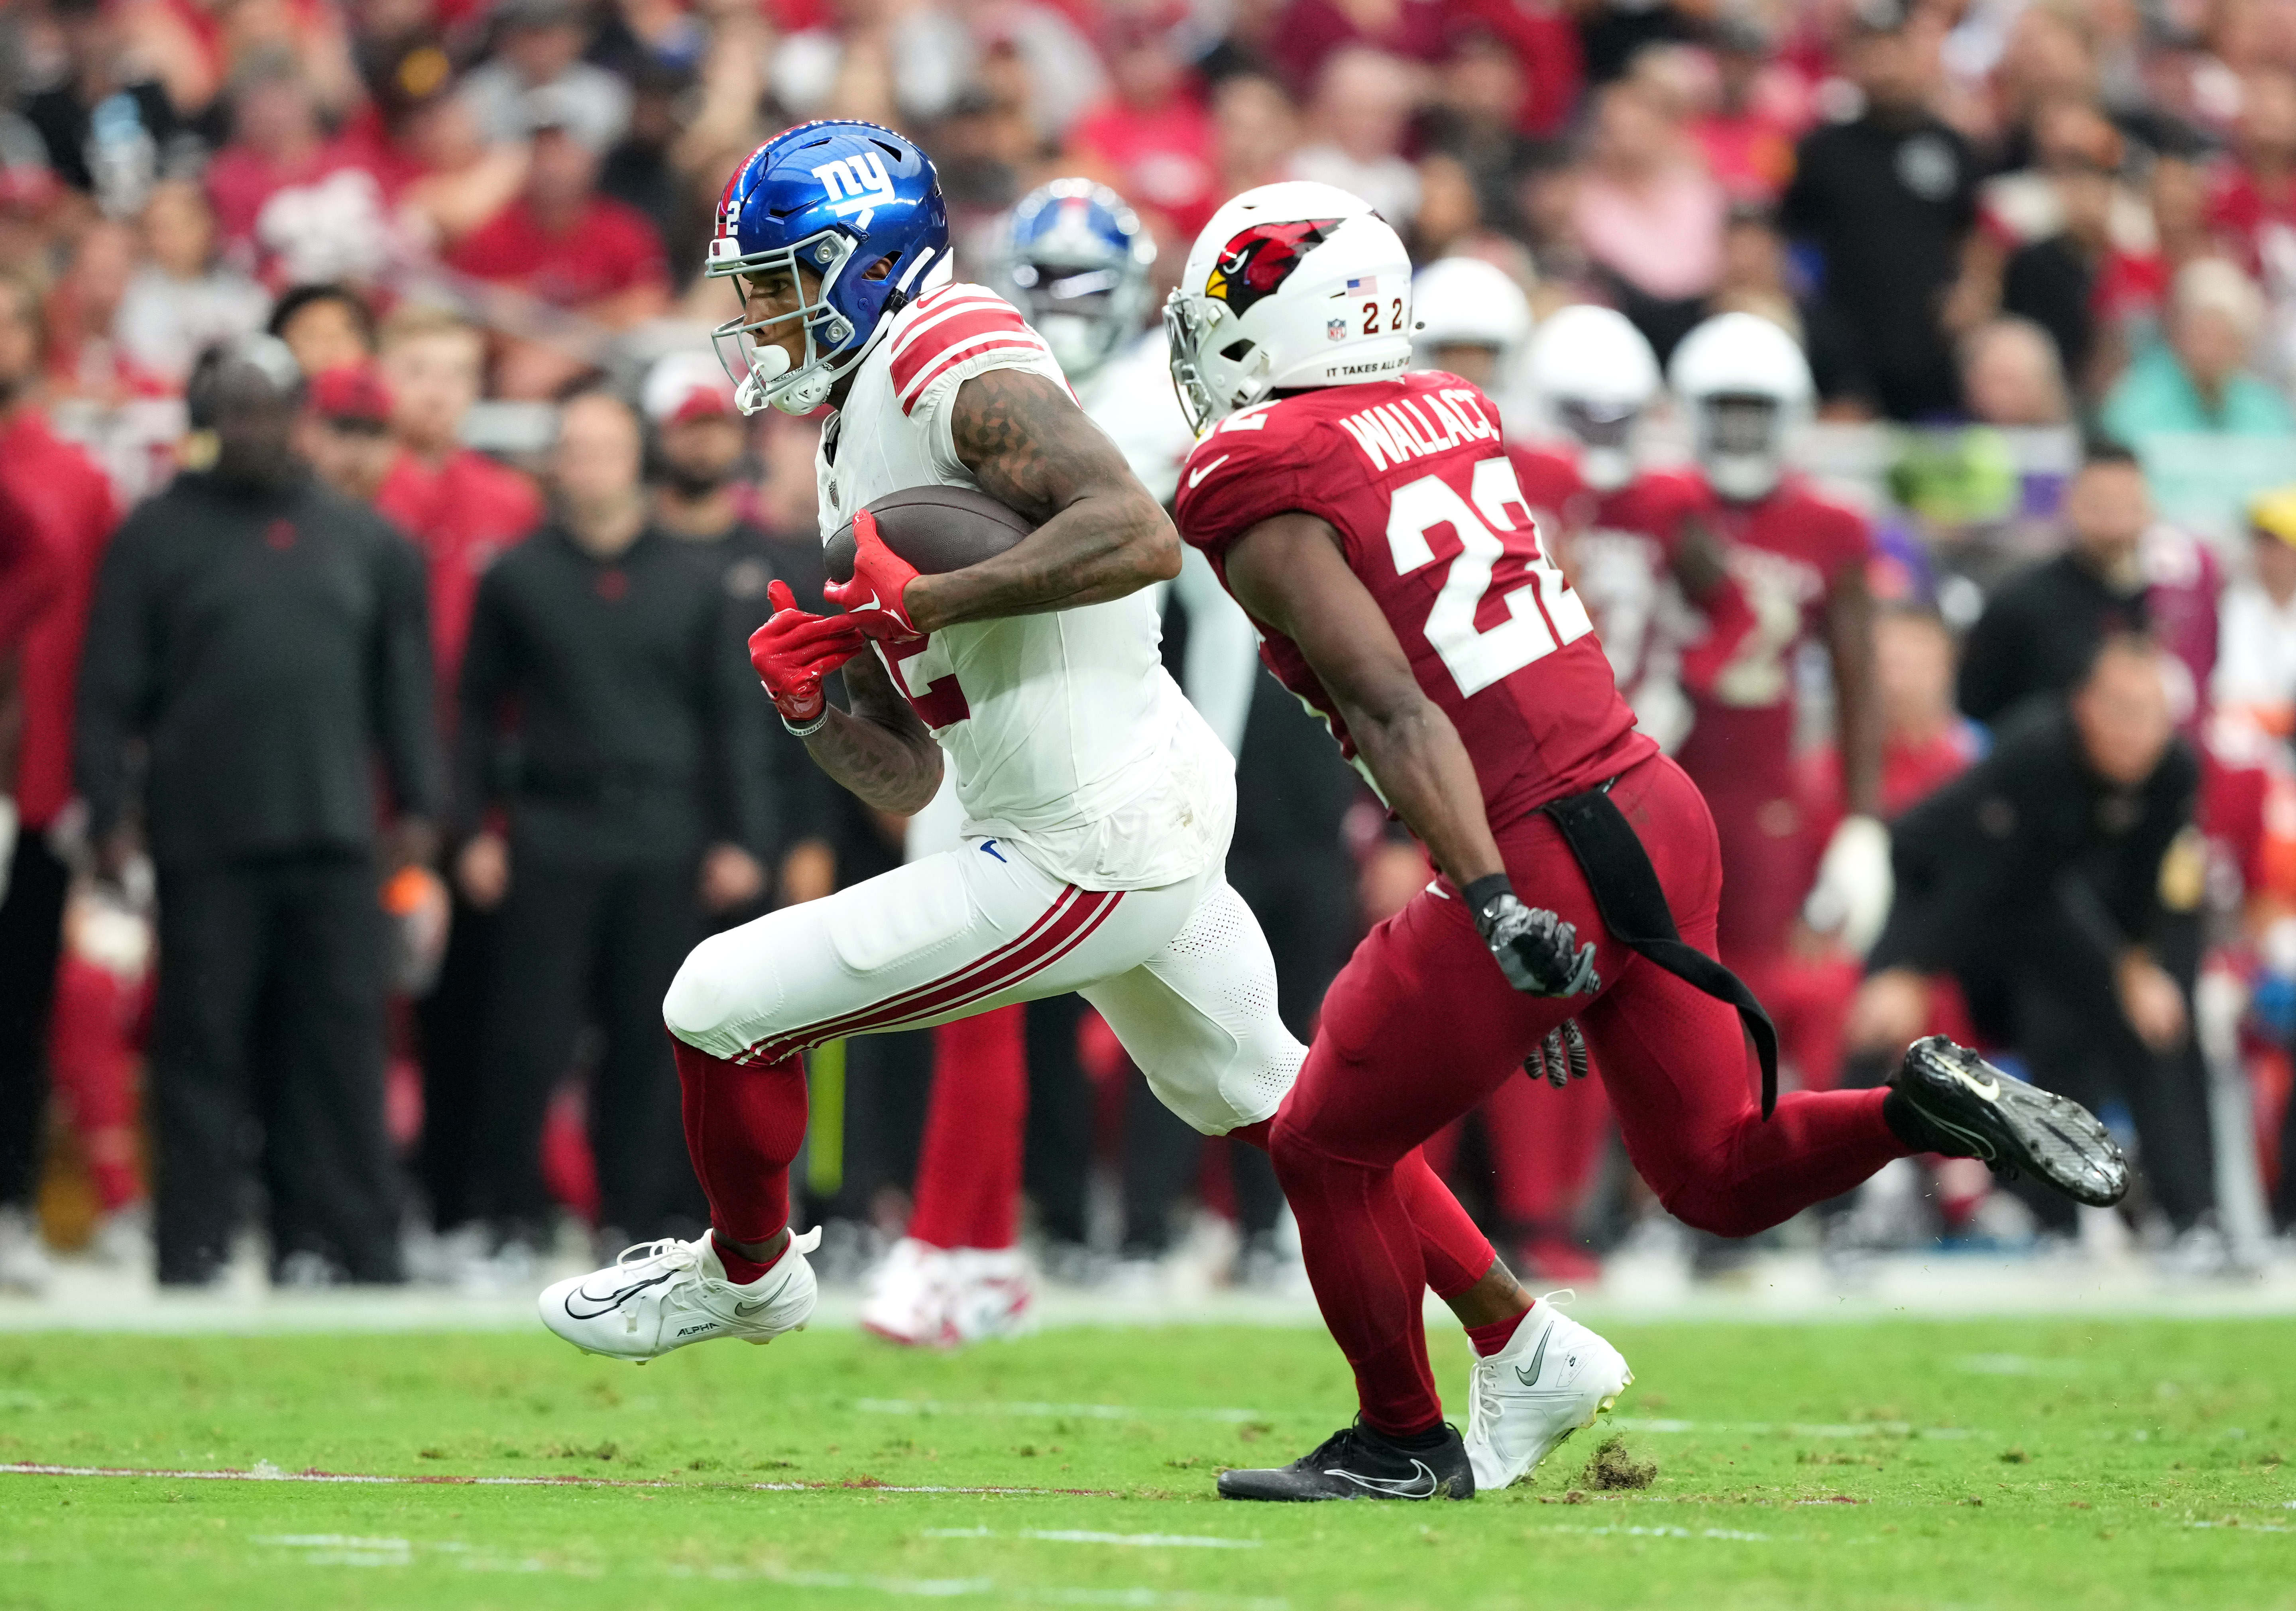 NY Giants score 31 points in the second half to beat Arizona Cardinals